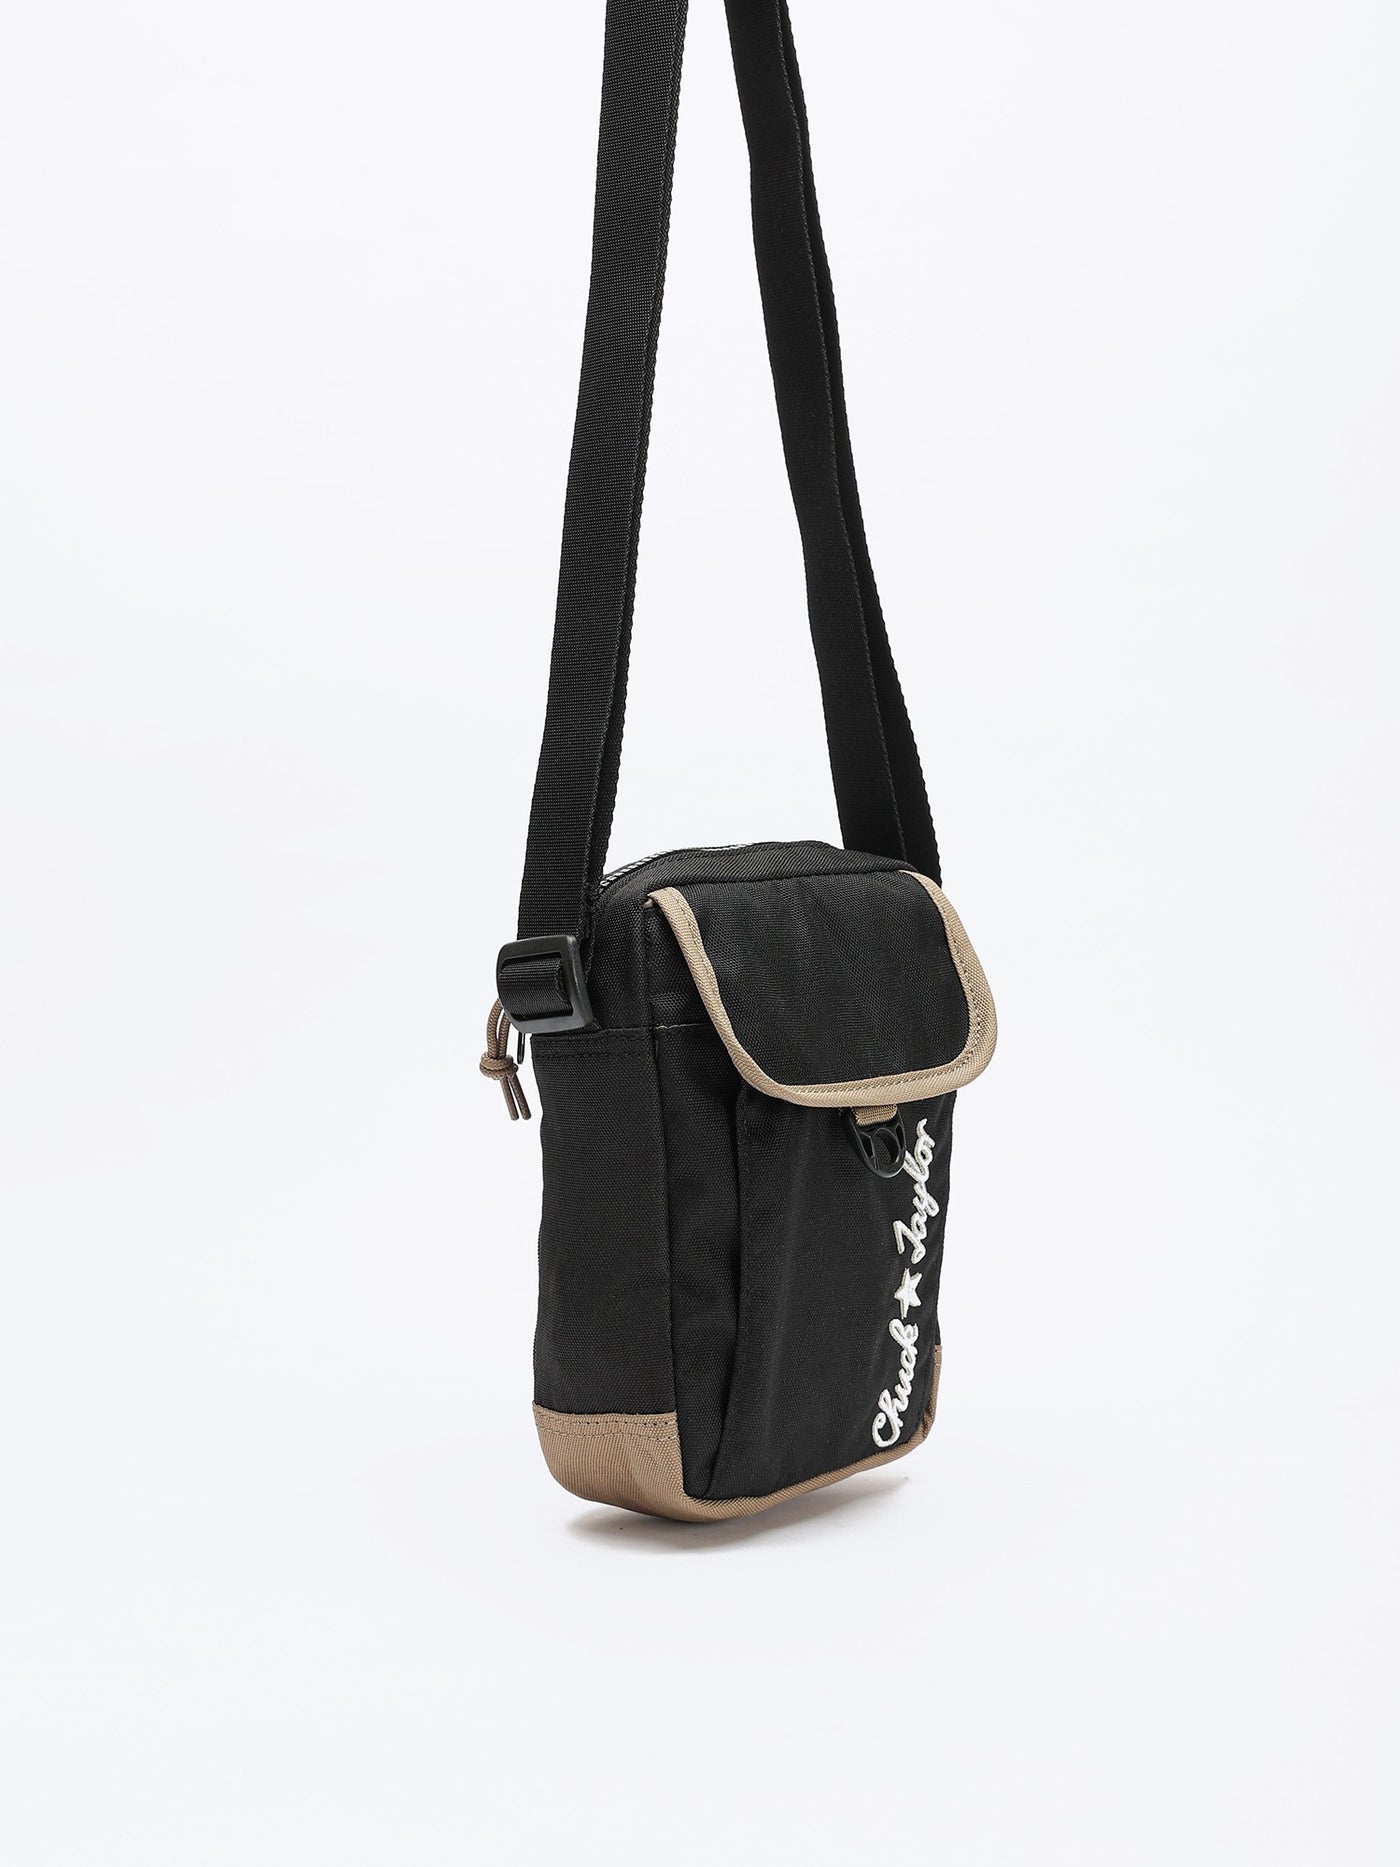 Unisex Crossbody Bag - Embroidered "Chuck Taylor"